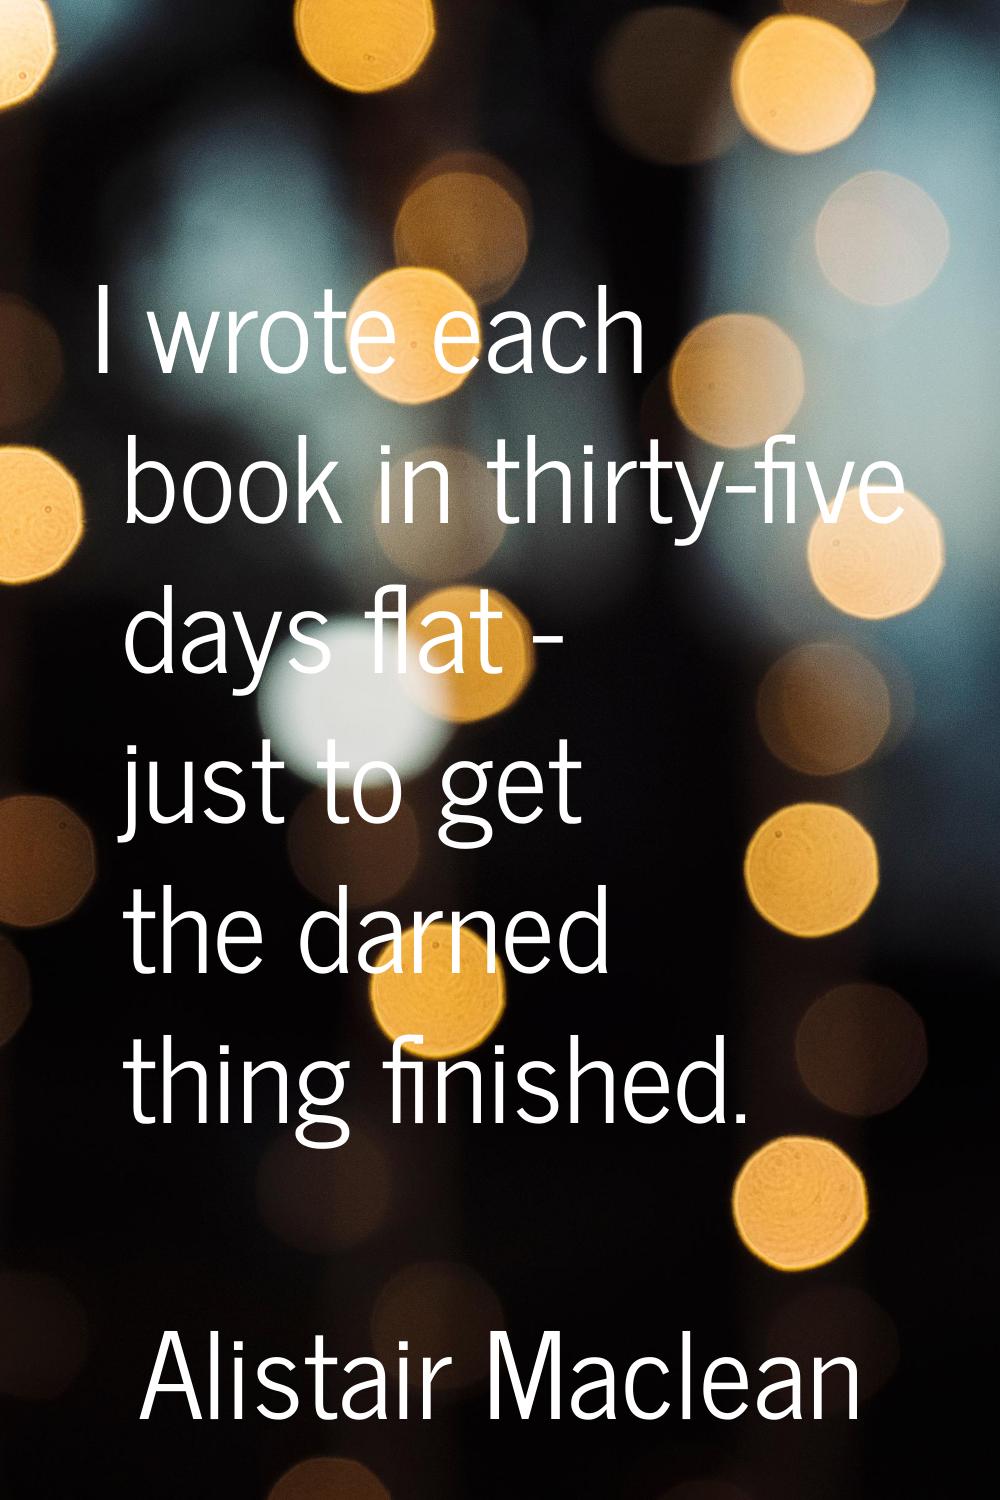 I wrote each book in thirty-five days flat - just to get the darned thing finished.